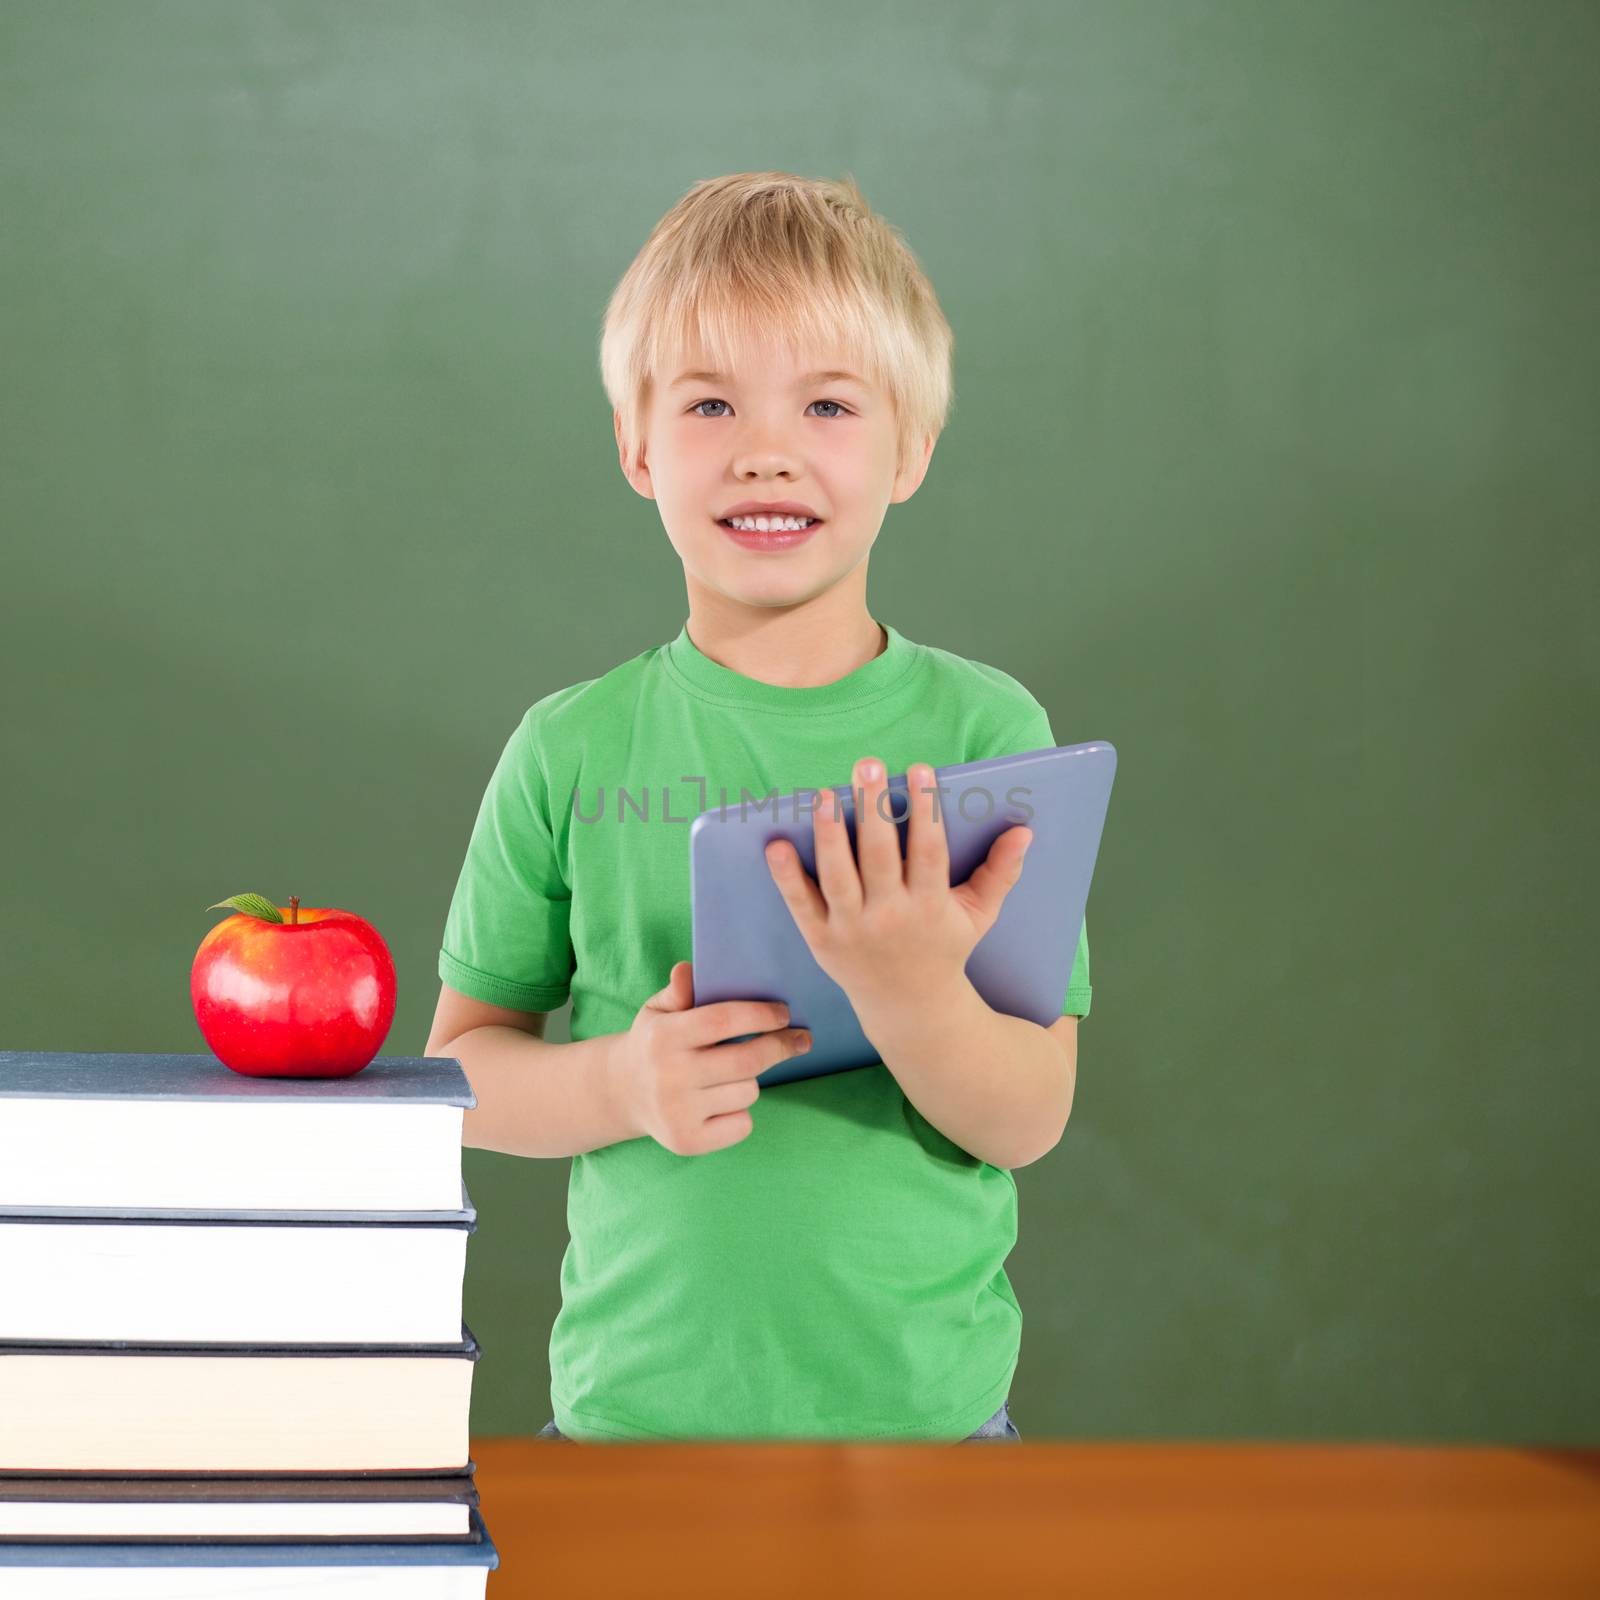 Cute boy using tablet against red apple on pile of books in classroom